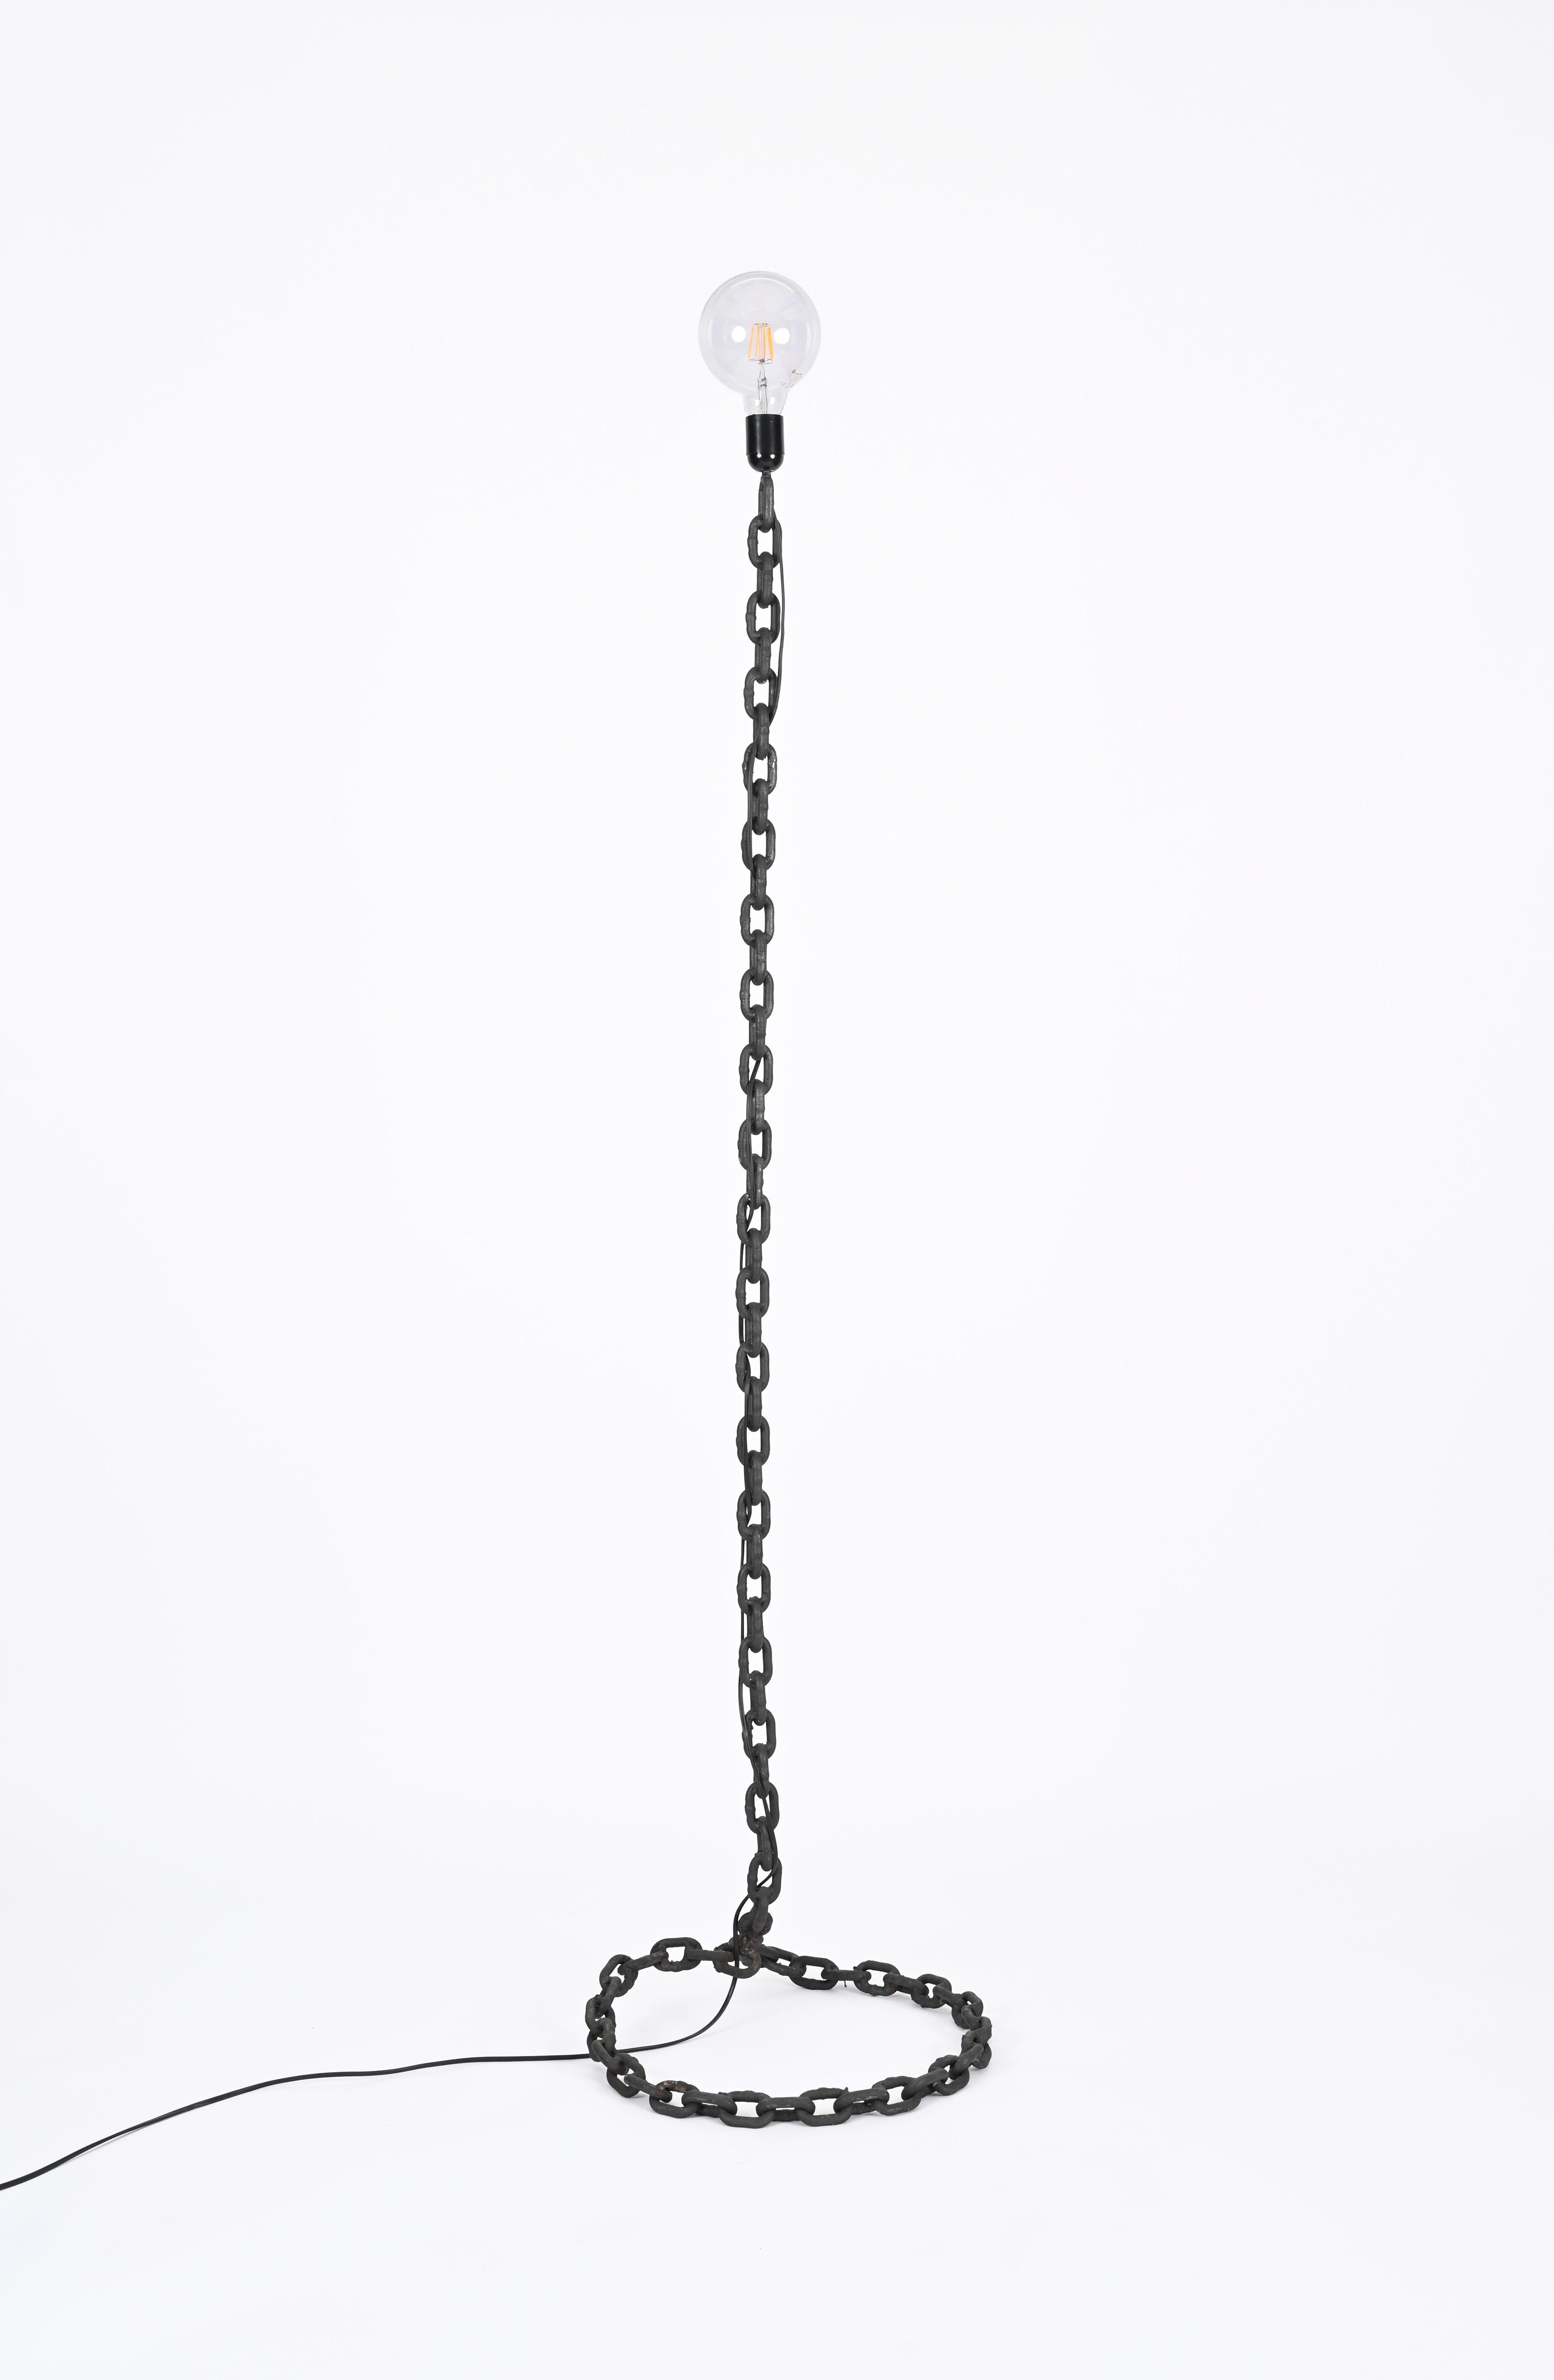 Franz West Brutalist Midcentury Chain Floor Lamp, Italy 1970s  For Sale 5